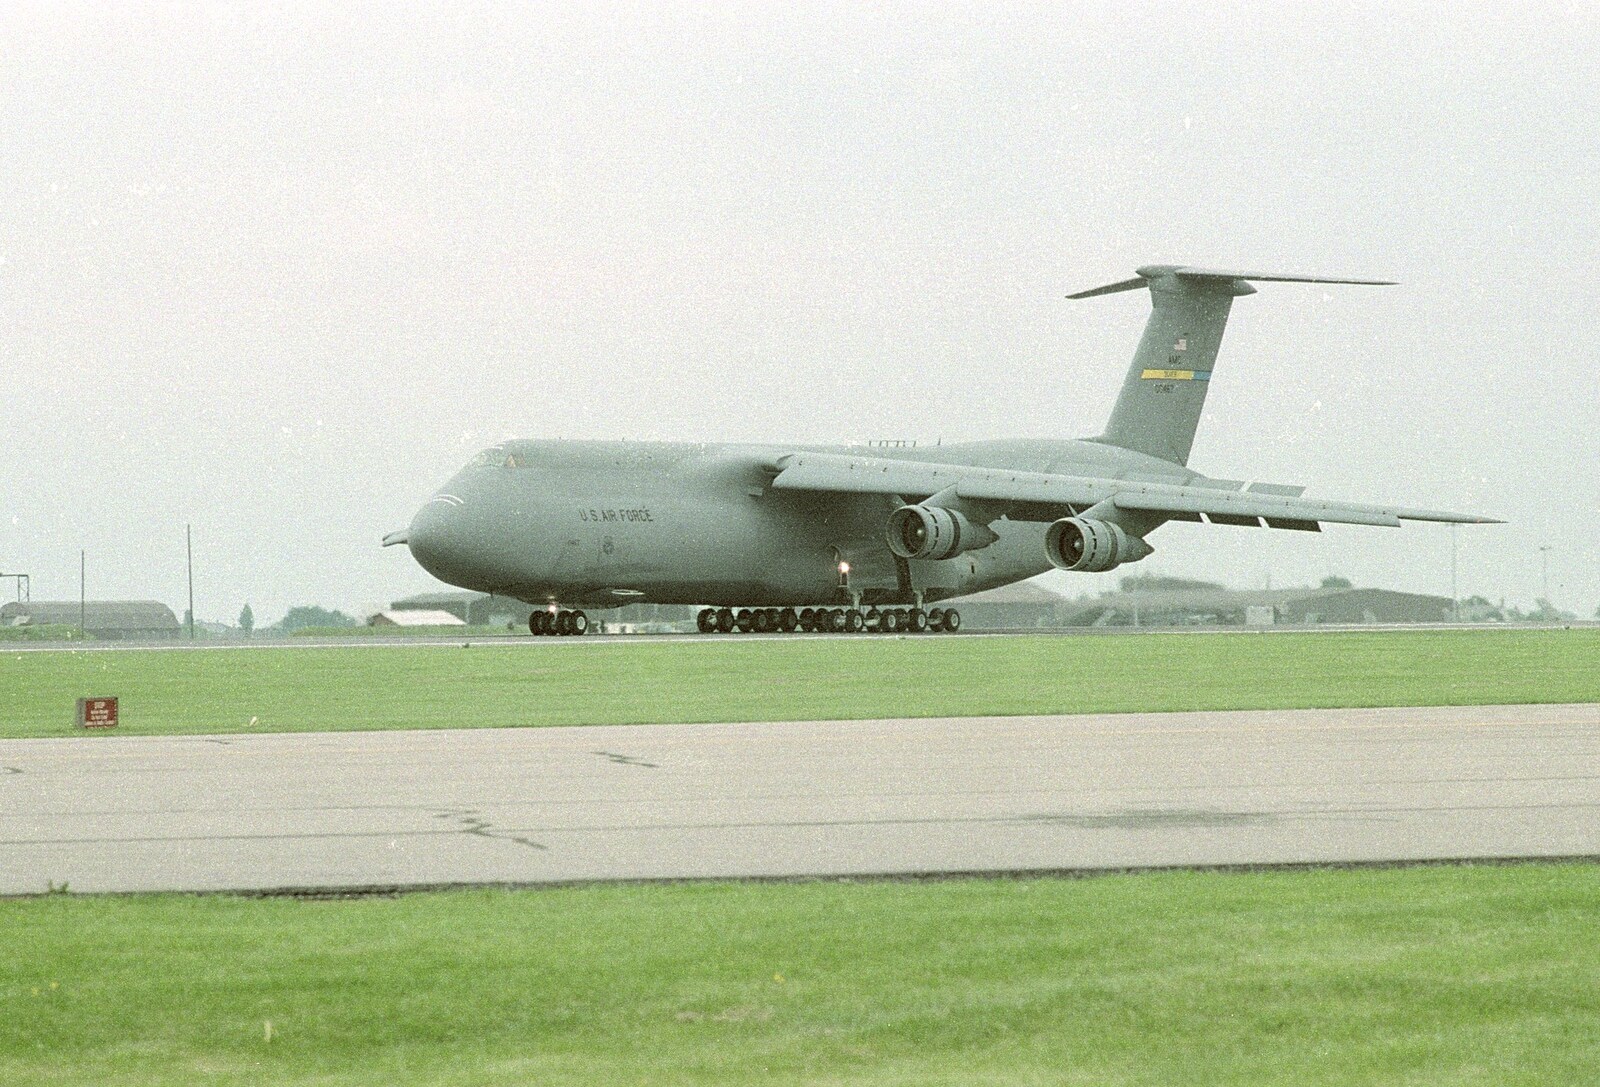 A C5 Galaxy with a hundred wheels from The Mildenhall Air Fete, Mildenhall, Suffolk - 29th May 1994